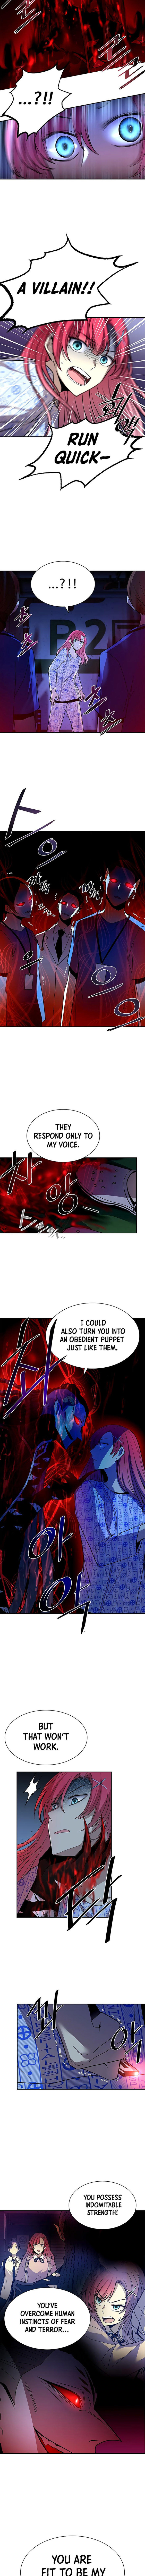 Villain To Kill - Chapter 20 Page 6